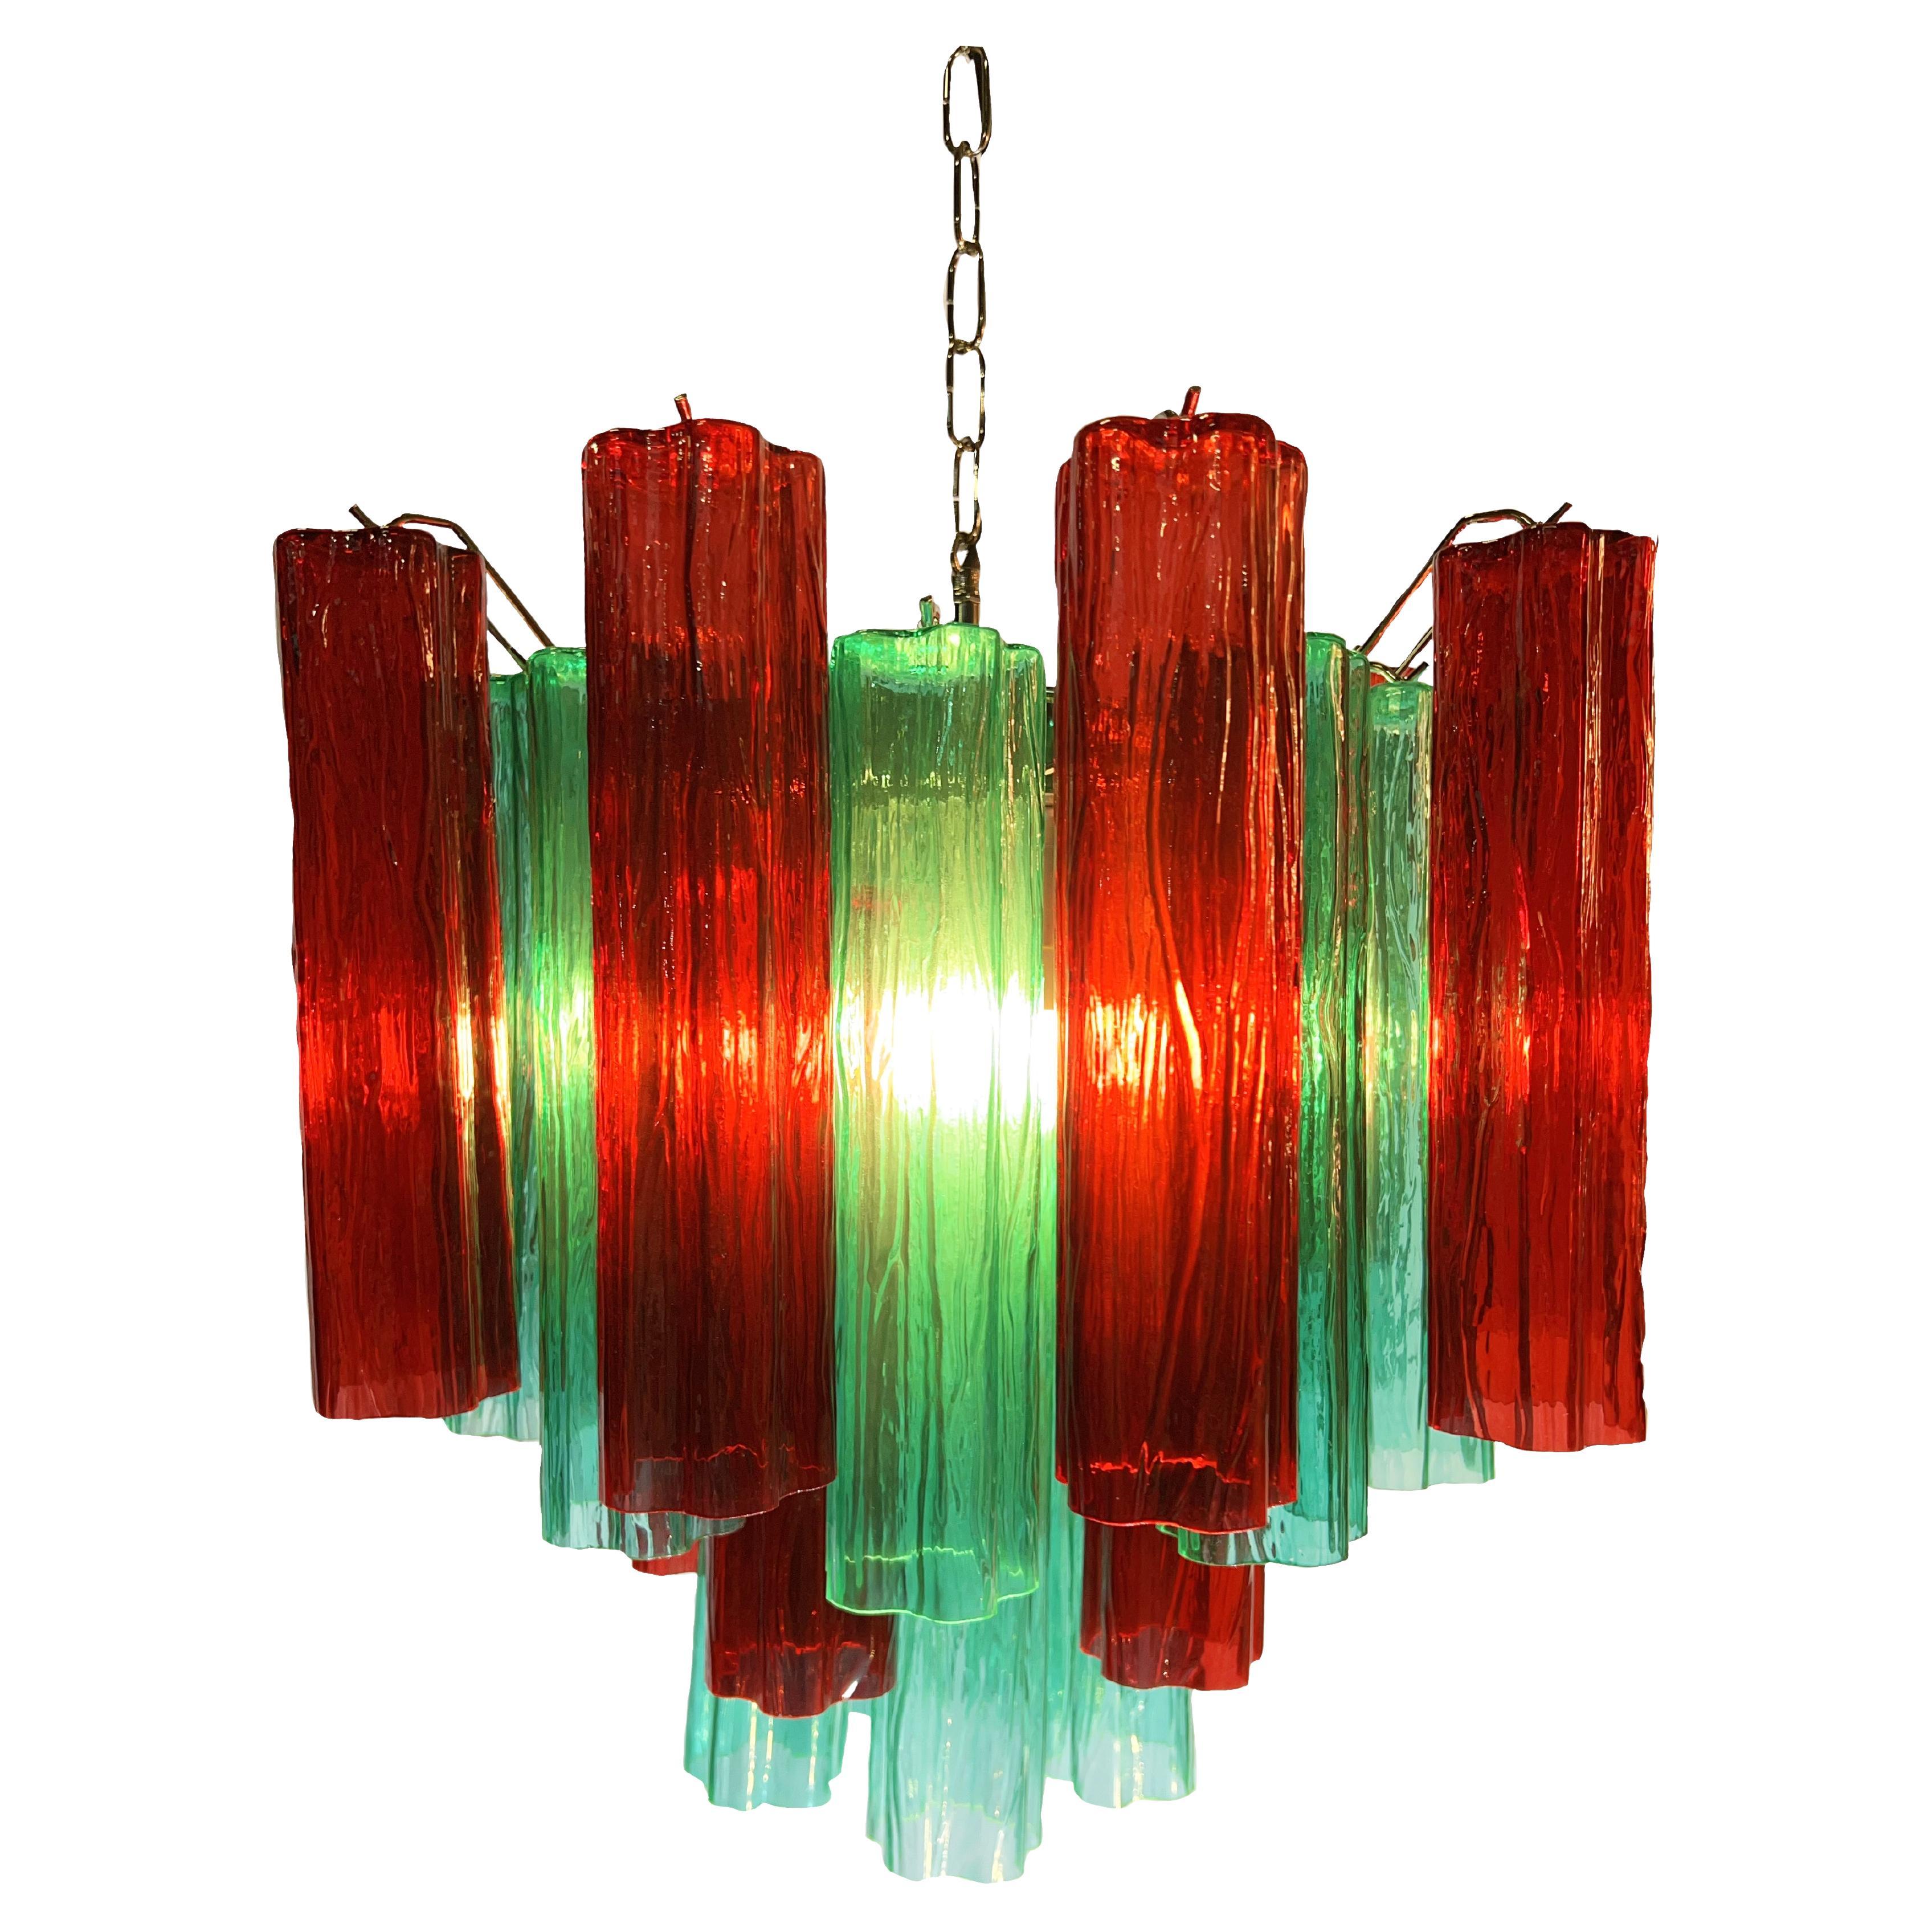 Fascinating Murano chandeliers. It is composed of 30 star shaped panes of pure Murano glass. The height is adjustable according to the height of the ceiling. At no extra cost we will replace the original lamp holders with those in use in the USA.